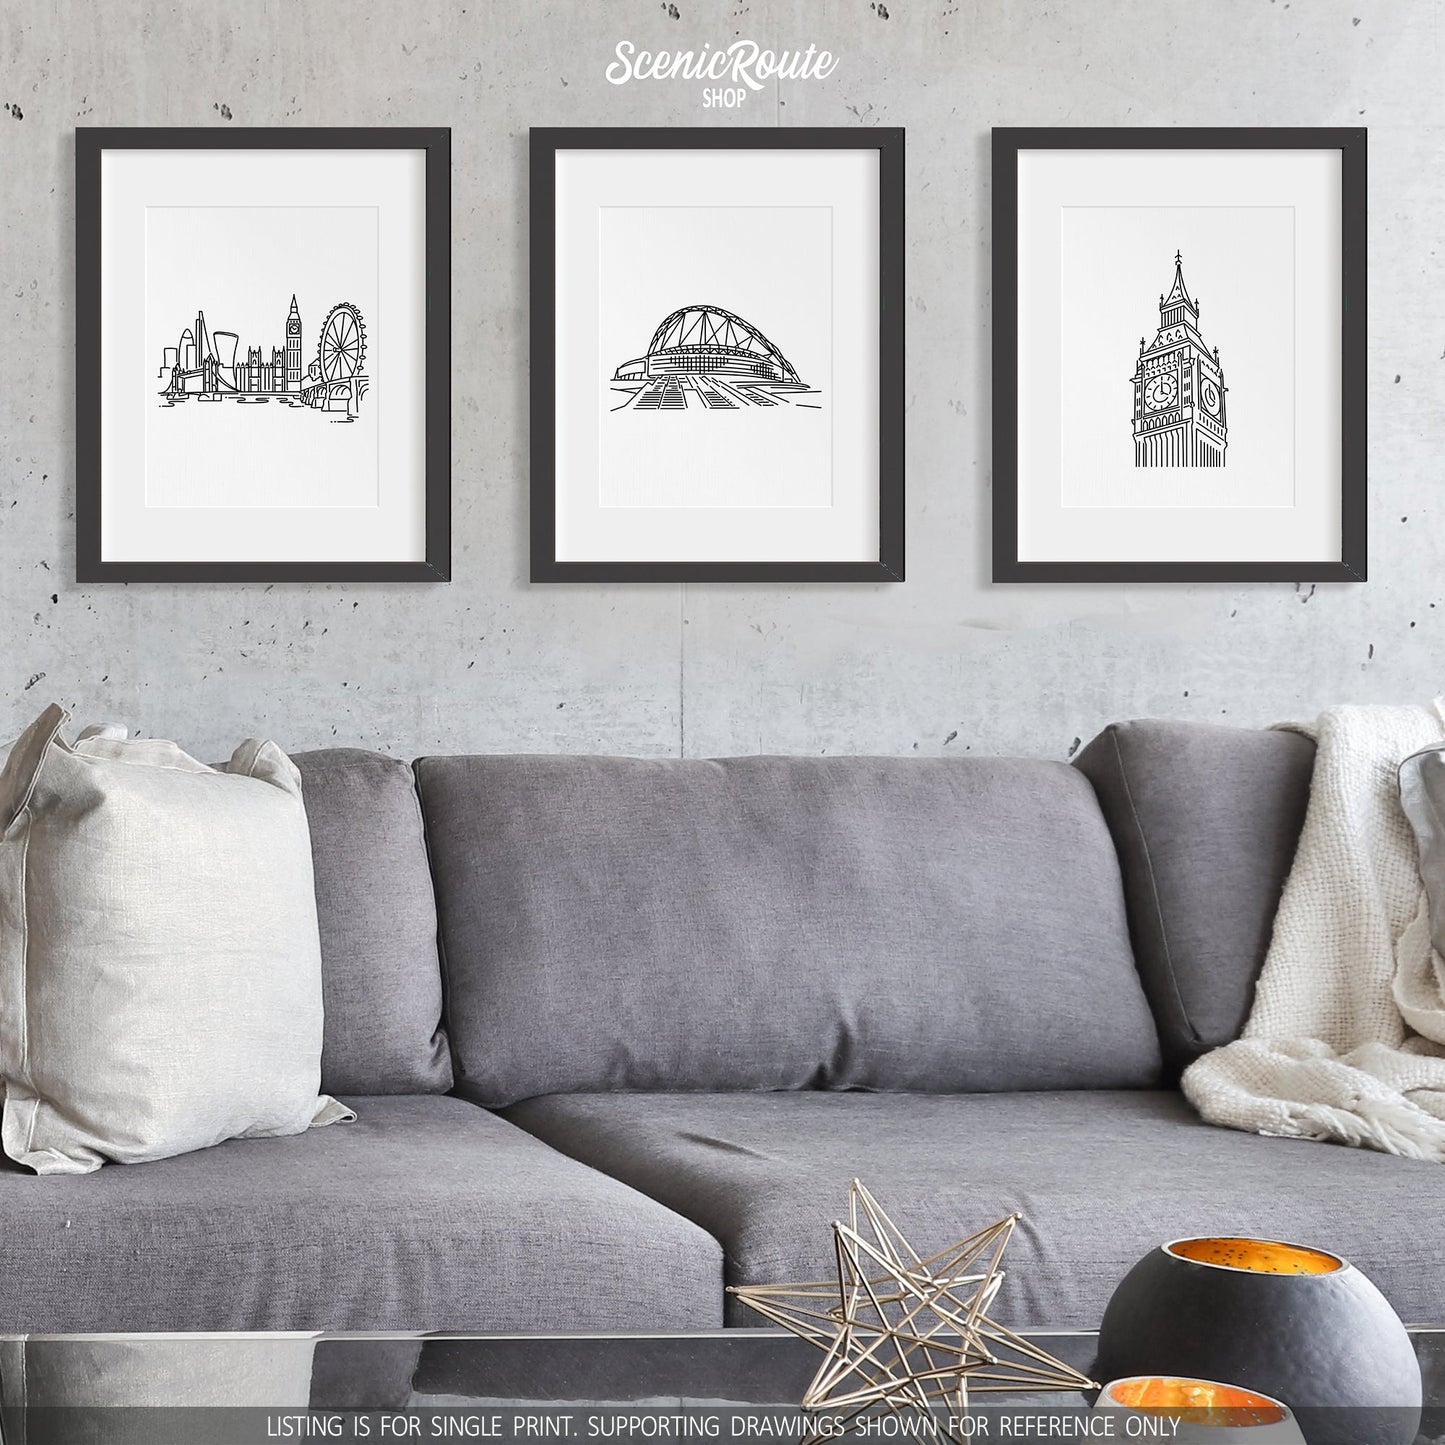 A group of three framed drawings on a wall above a couch. The line art drawings include the London Skyline, Wembley Stadium, and Big Ben